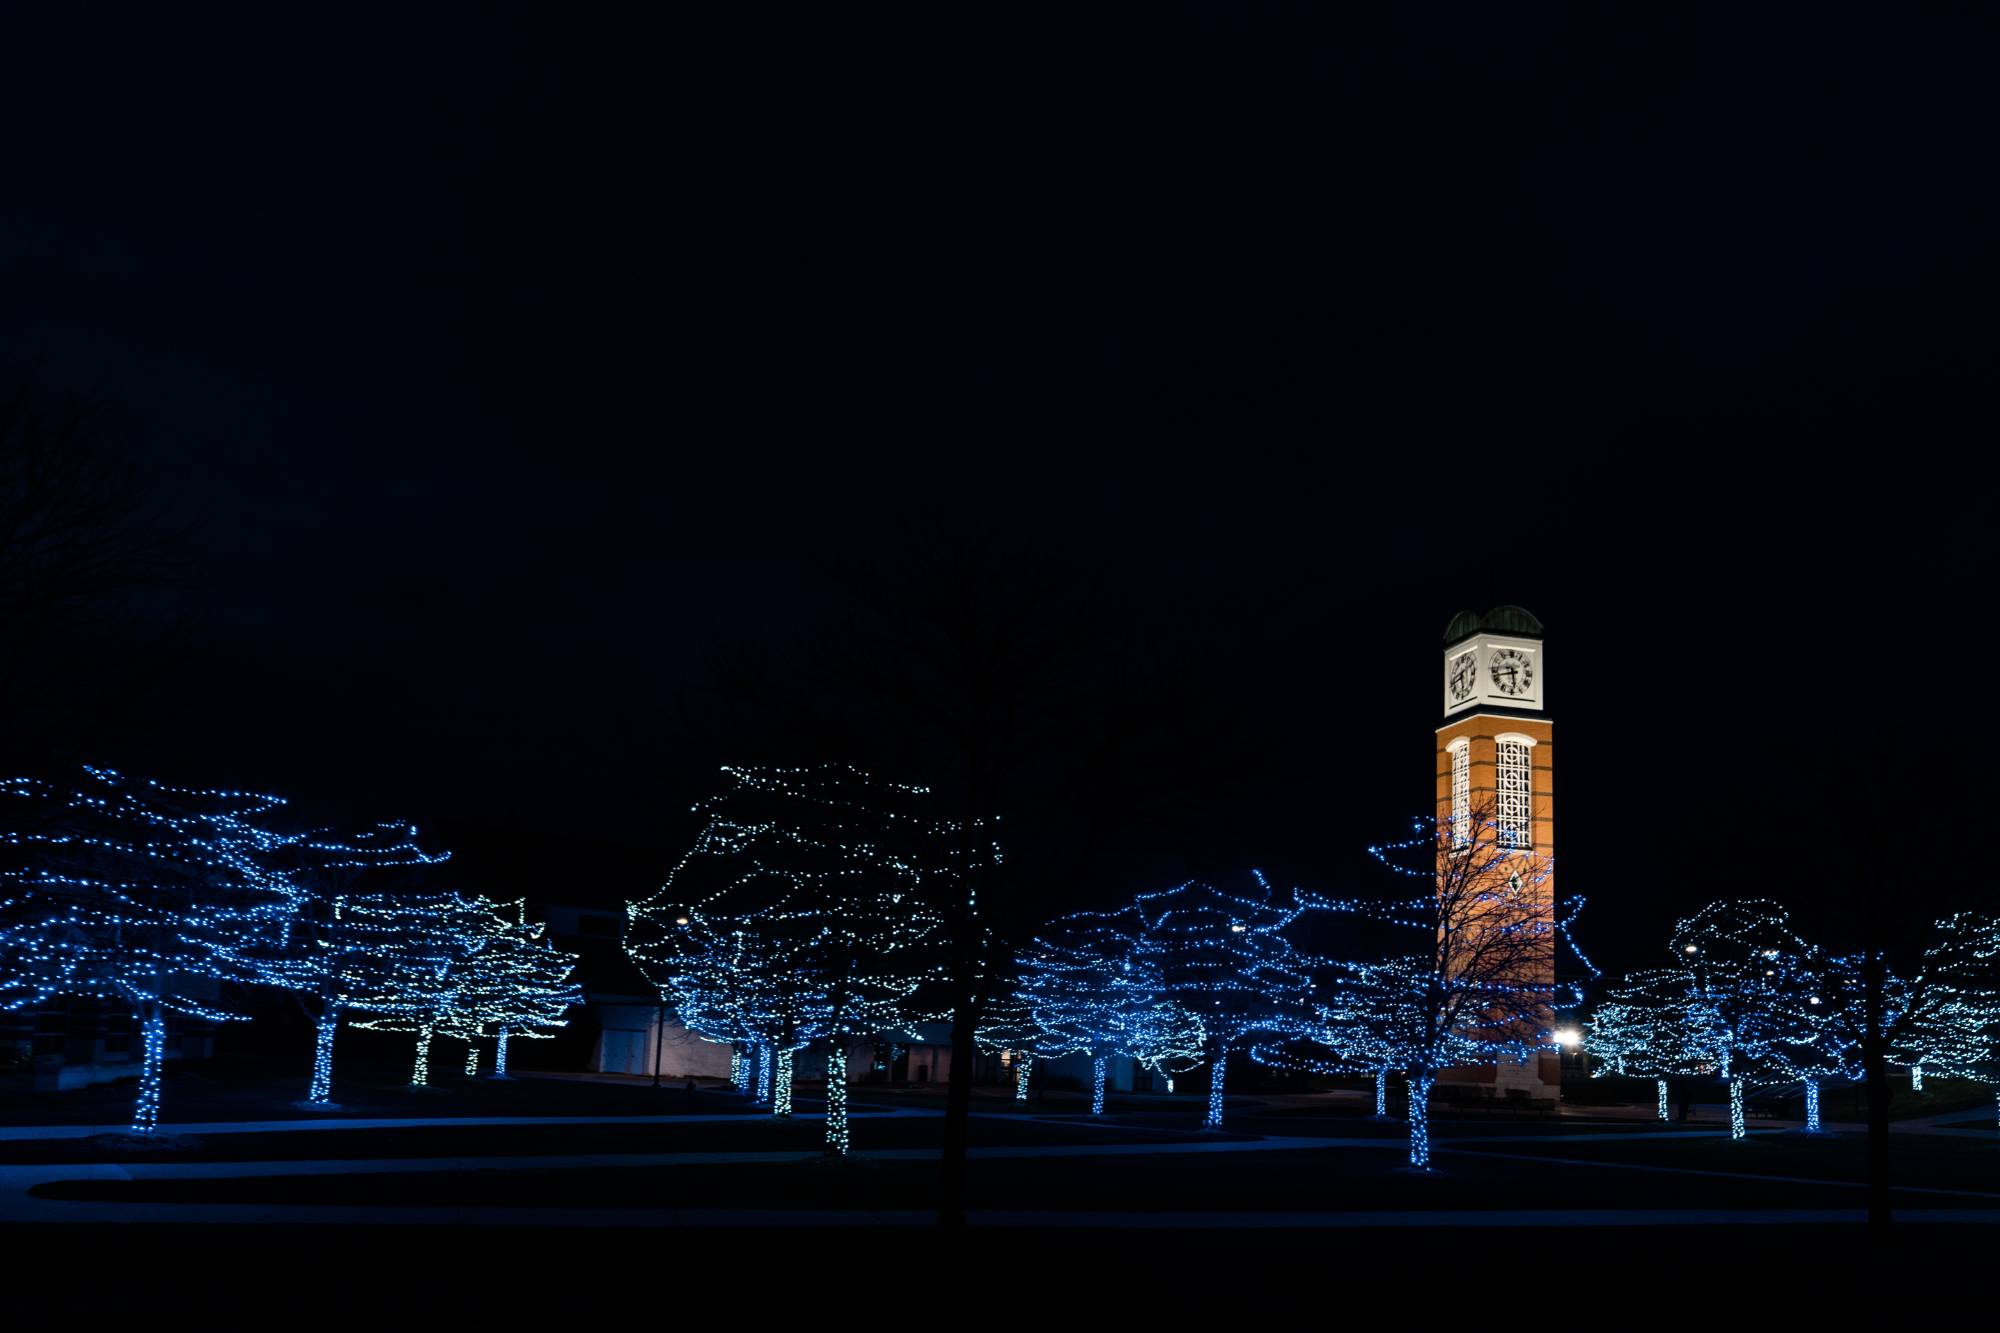 The Cook Carillon Towe on GVSU's Allendale Campus at night with lights